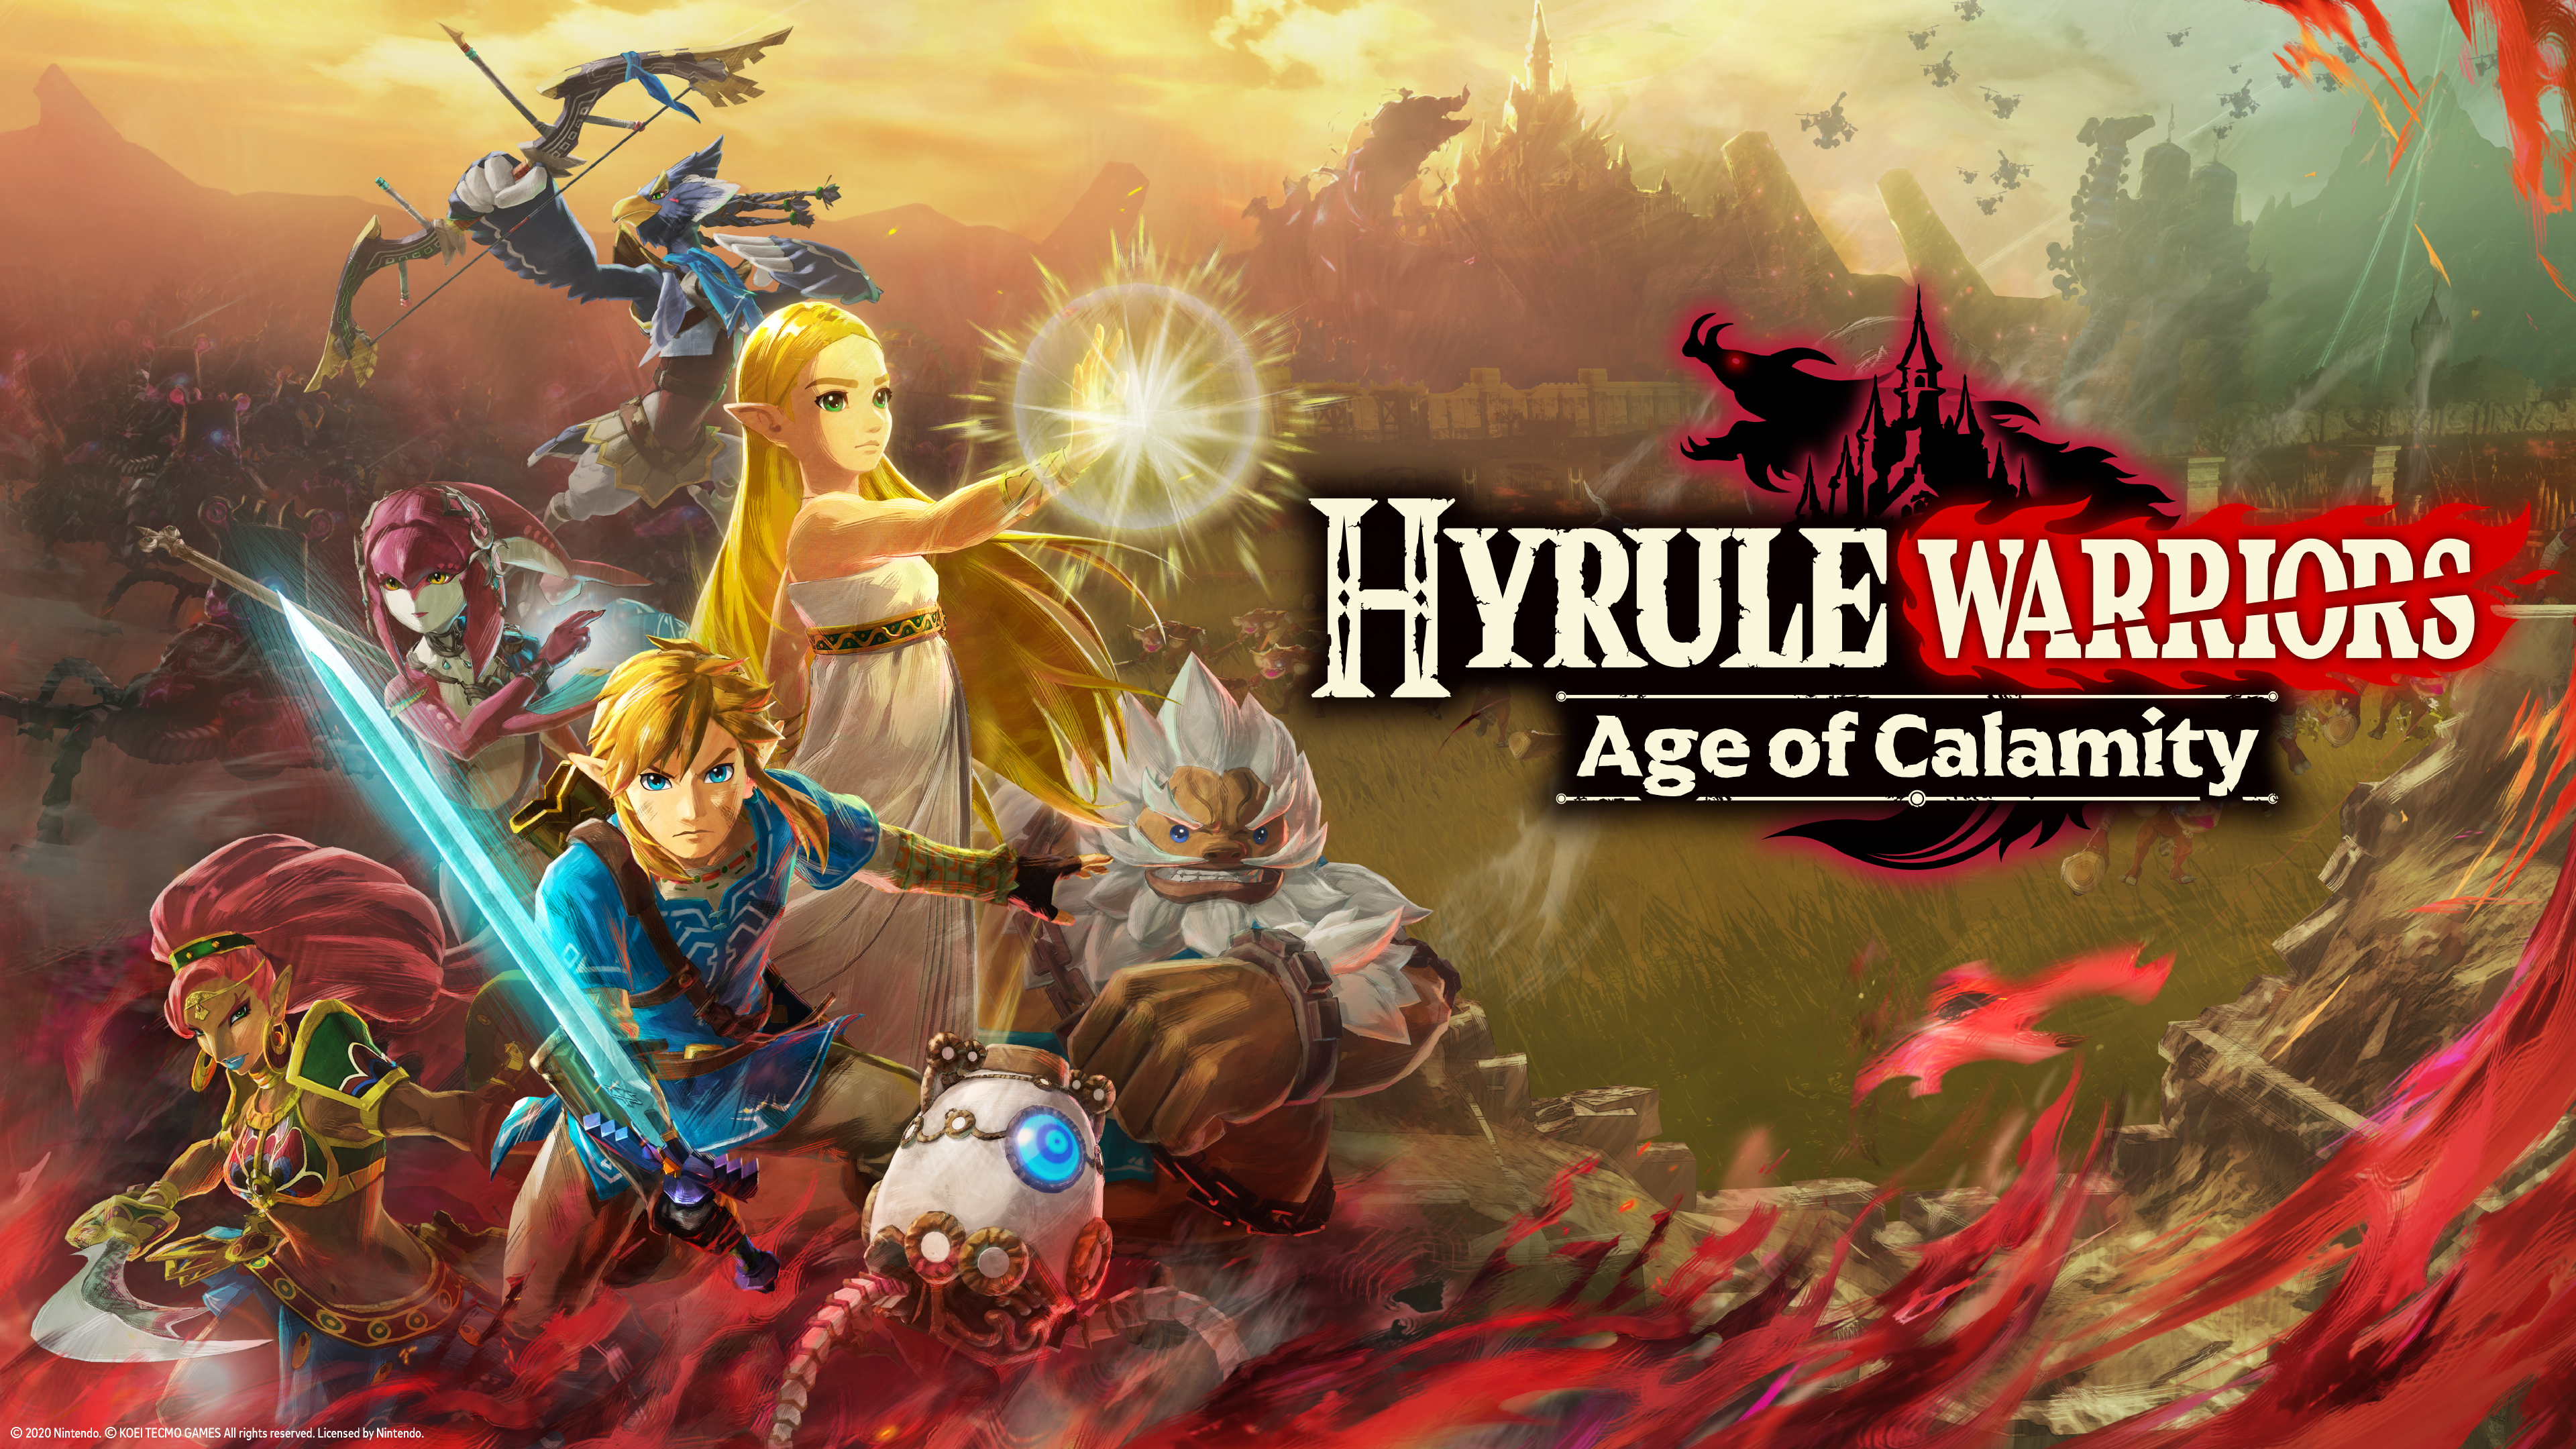 Video Game Hyrule Warriors: Age of Calamity HD Wallpaper | Background Image